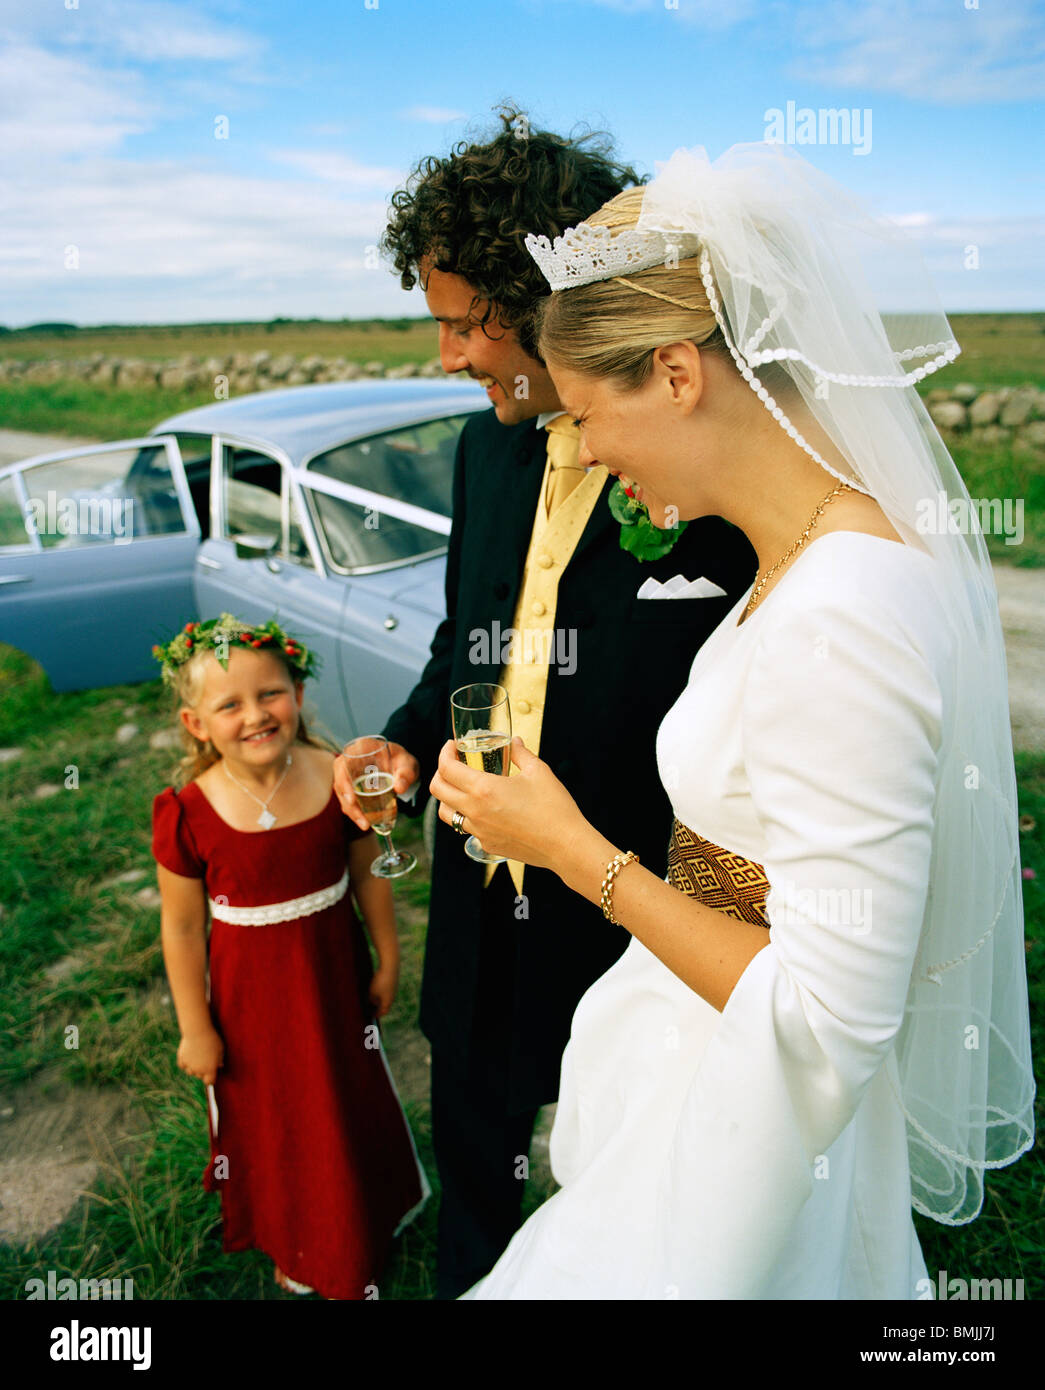 Scandinavia, Sweden, Oland, Bride and groom with flower girl, smiling Stock Photo